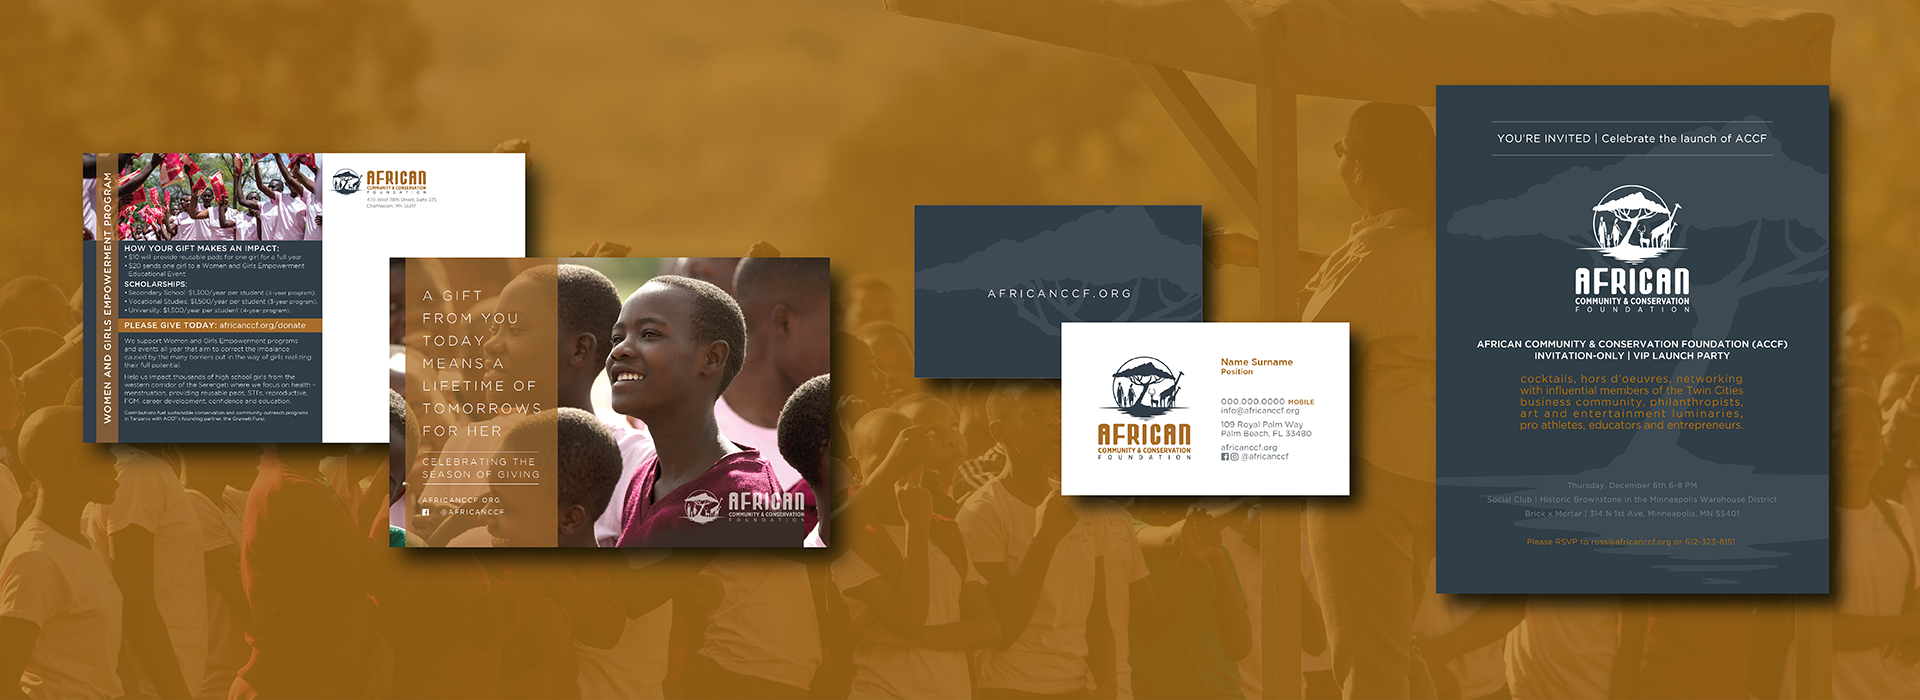 African Community & Conservation Foundation Print Materials